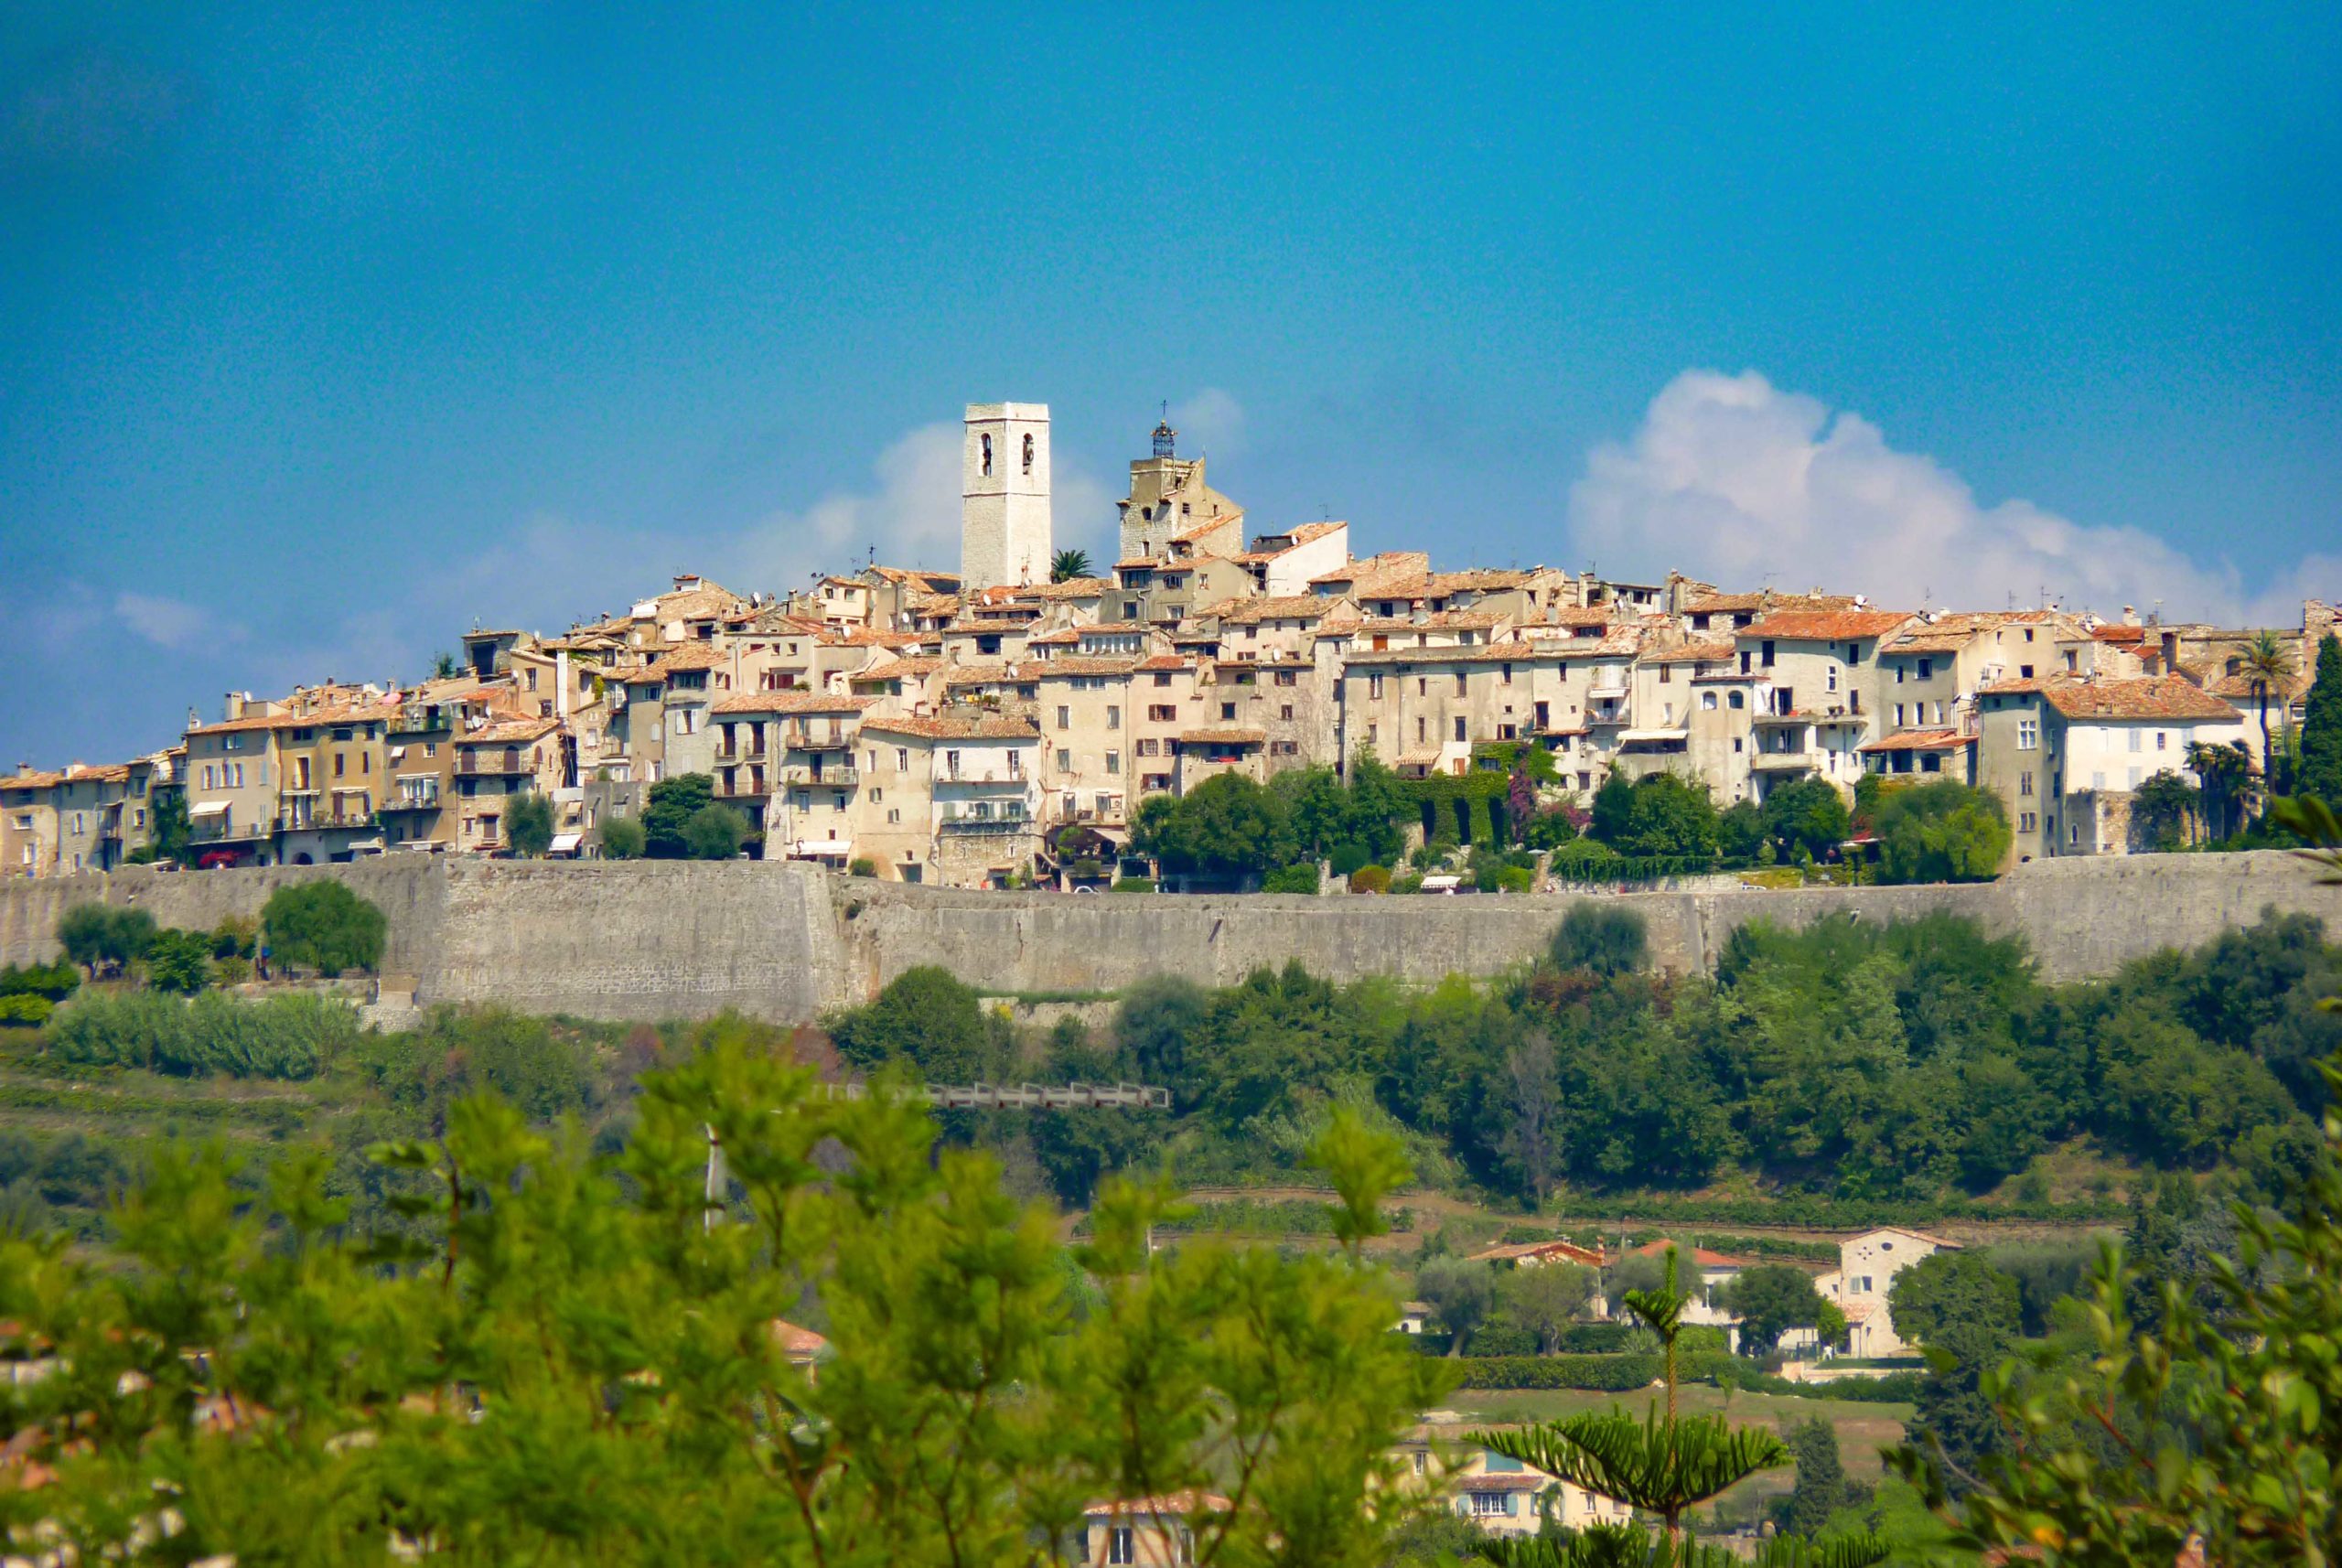 Villages around Cannes: Saint-Paul de Vence © Frantogian - licence [CC BY-SA 3.0] from Wikimedia Commons